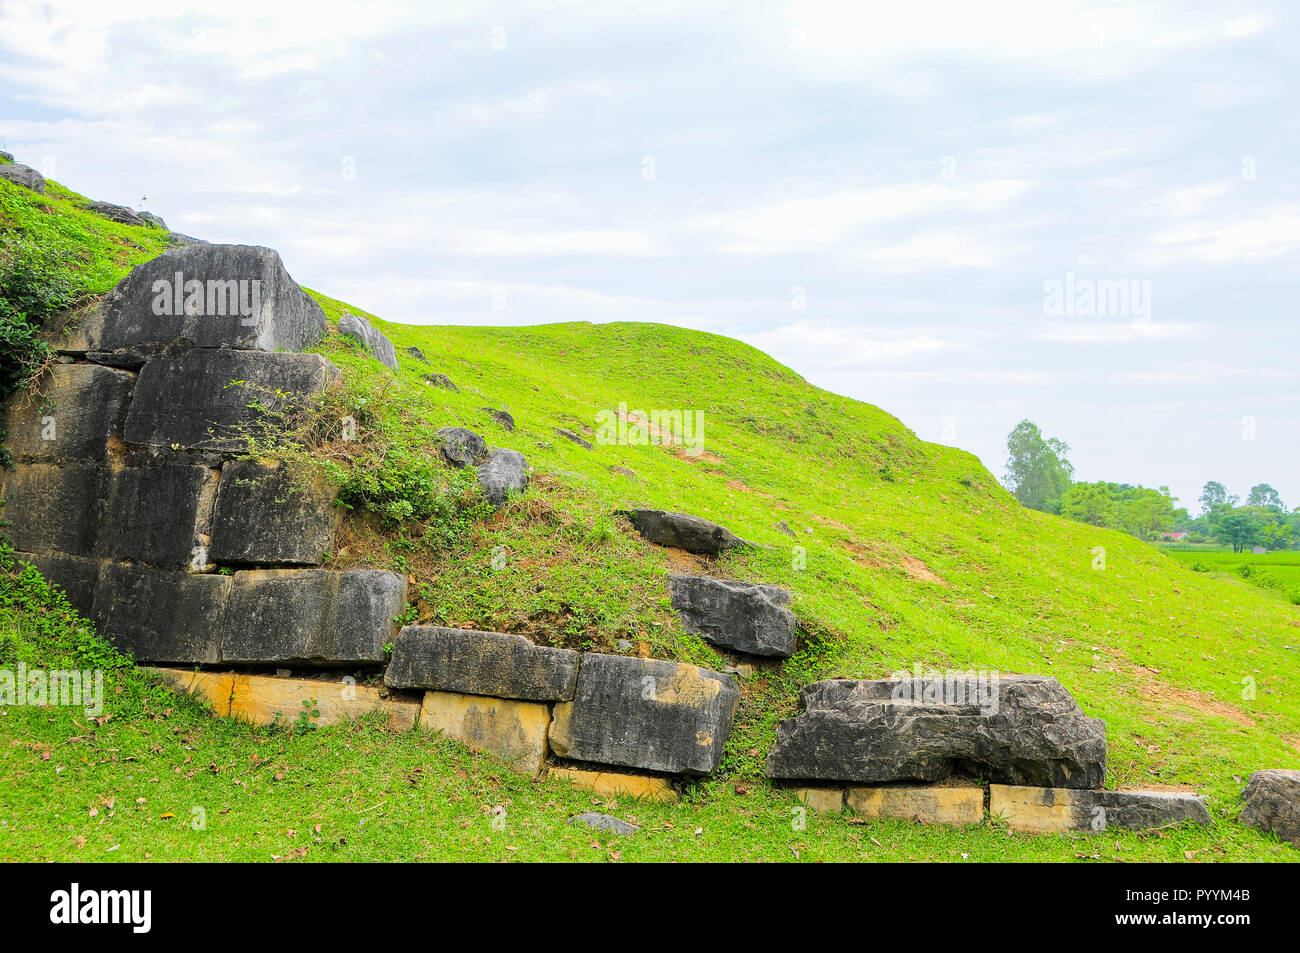 Massive stones and earthen ramparts form the north wall of the Ho Citadel, Thanh Hoa Province, Vietnam. The citadel became a UNESCO World Heritage Sit Stock Photo